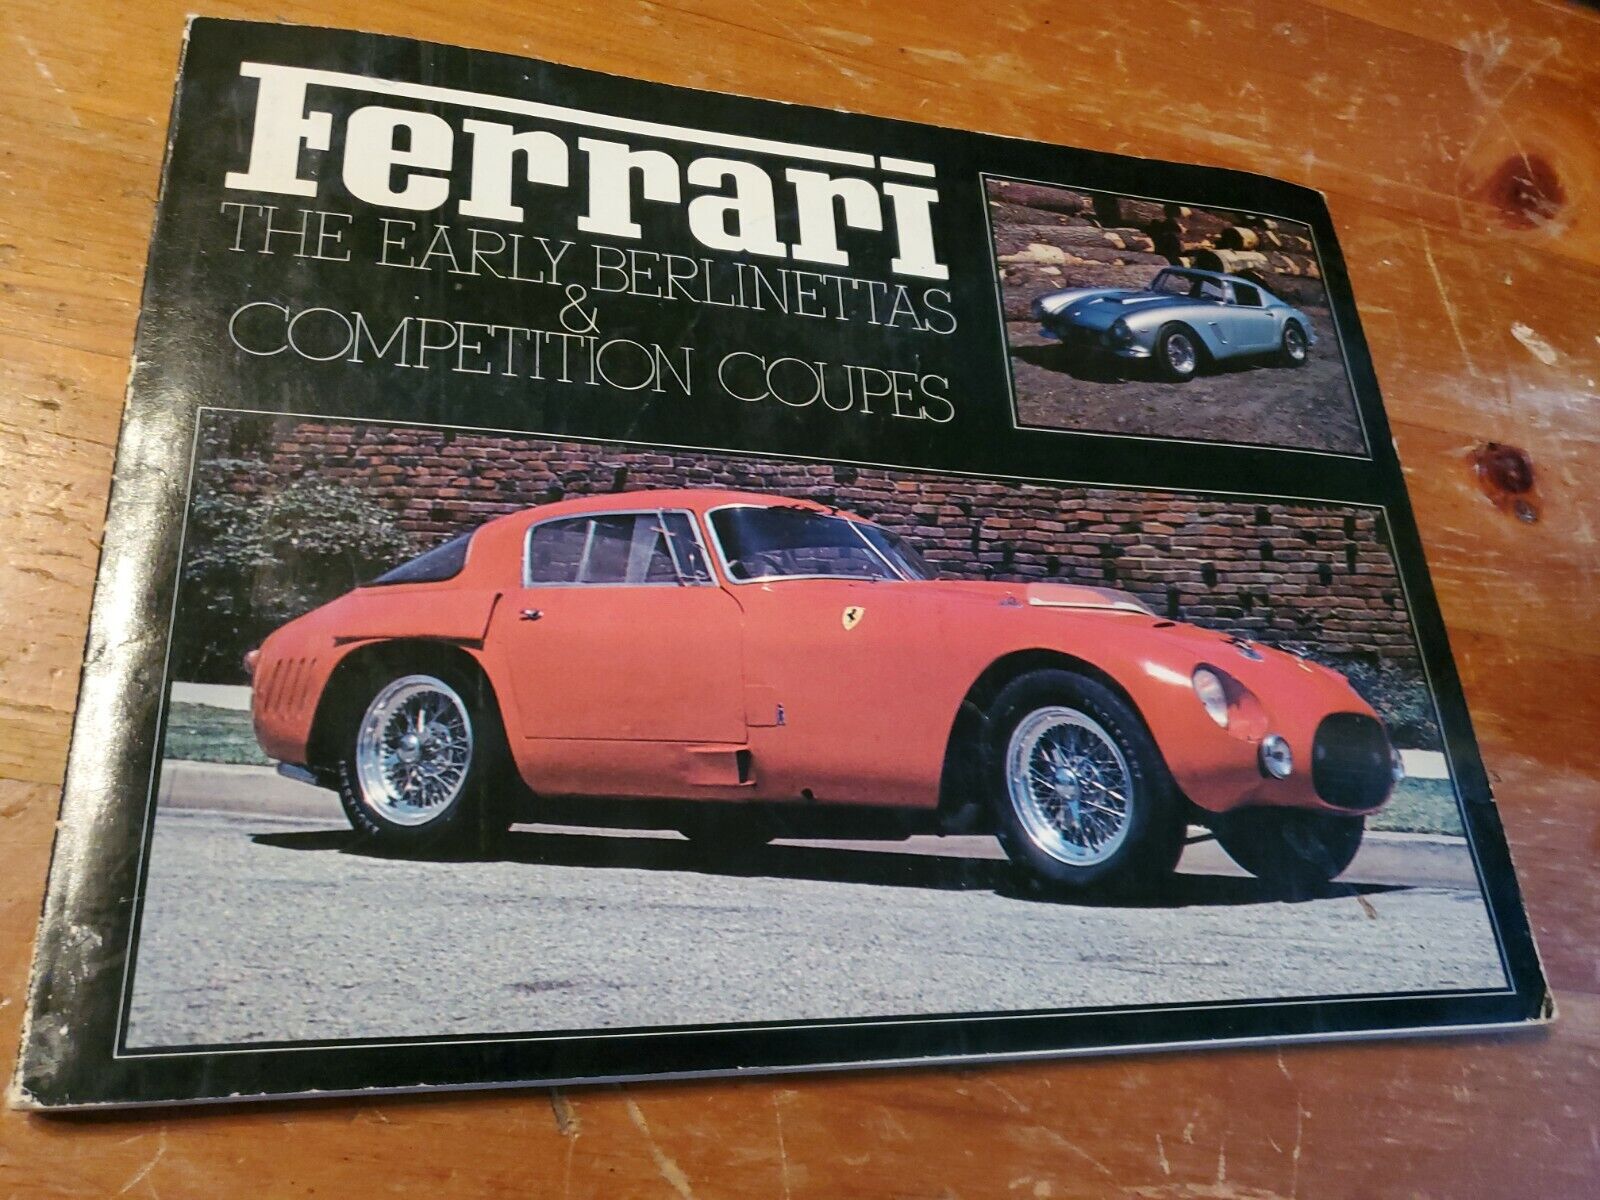 Ferrari The Early Berlinettas & Competition Coupes - Vintage Car Book